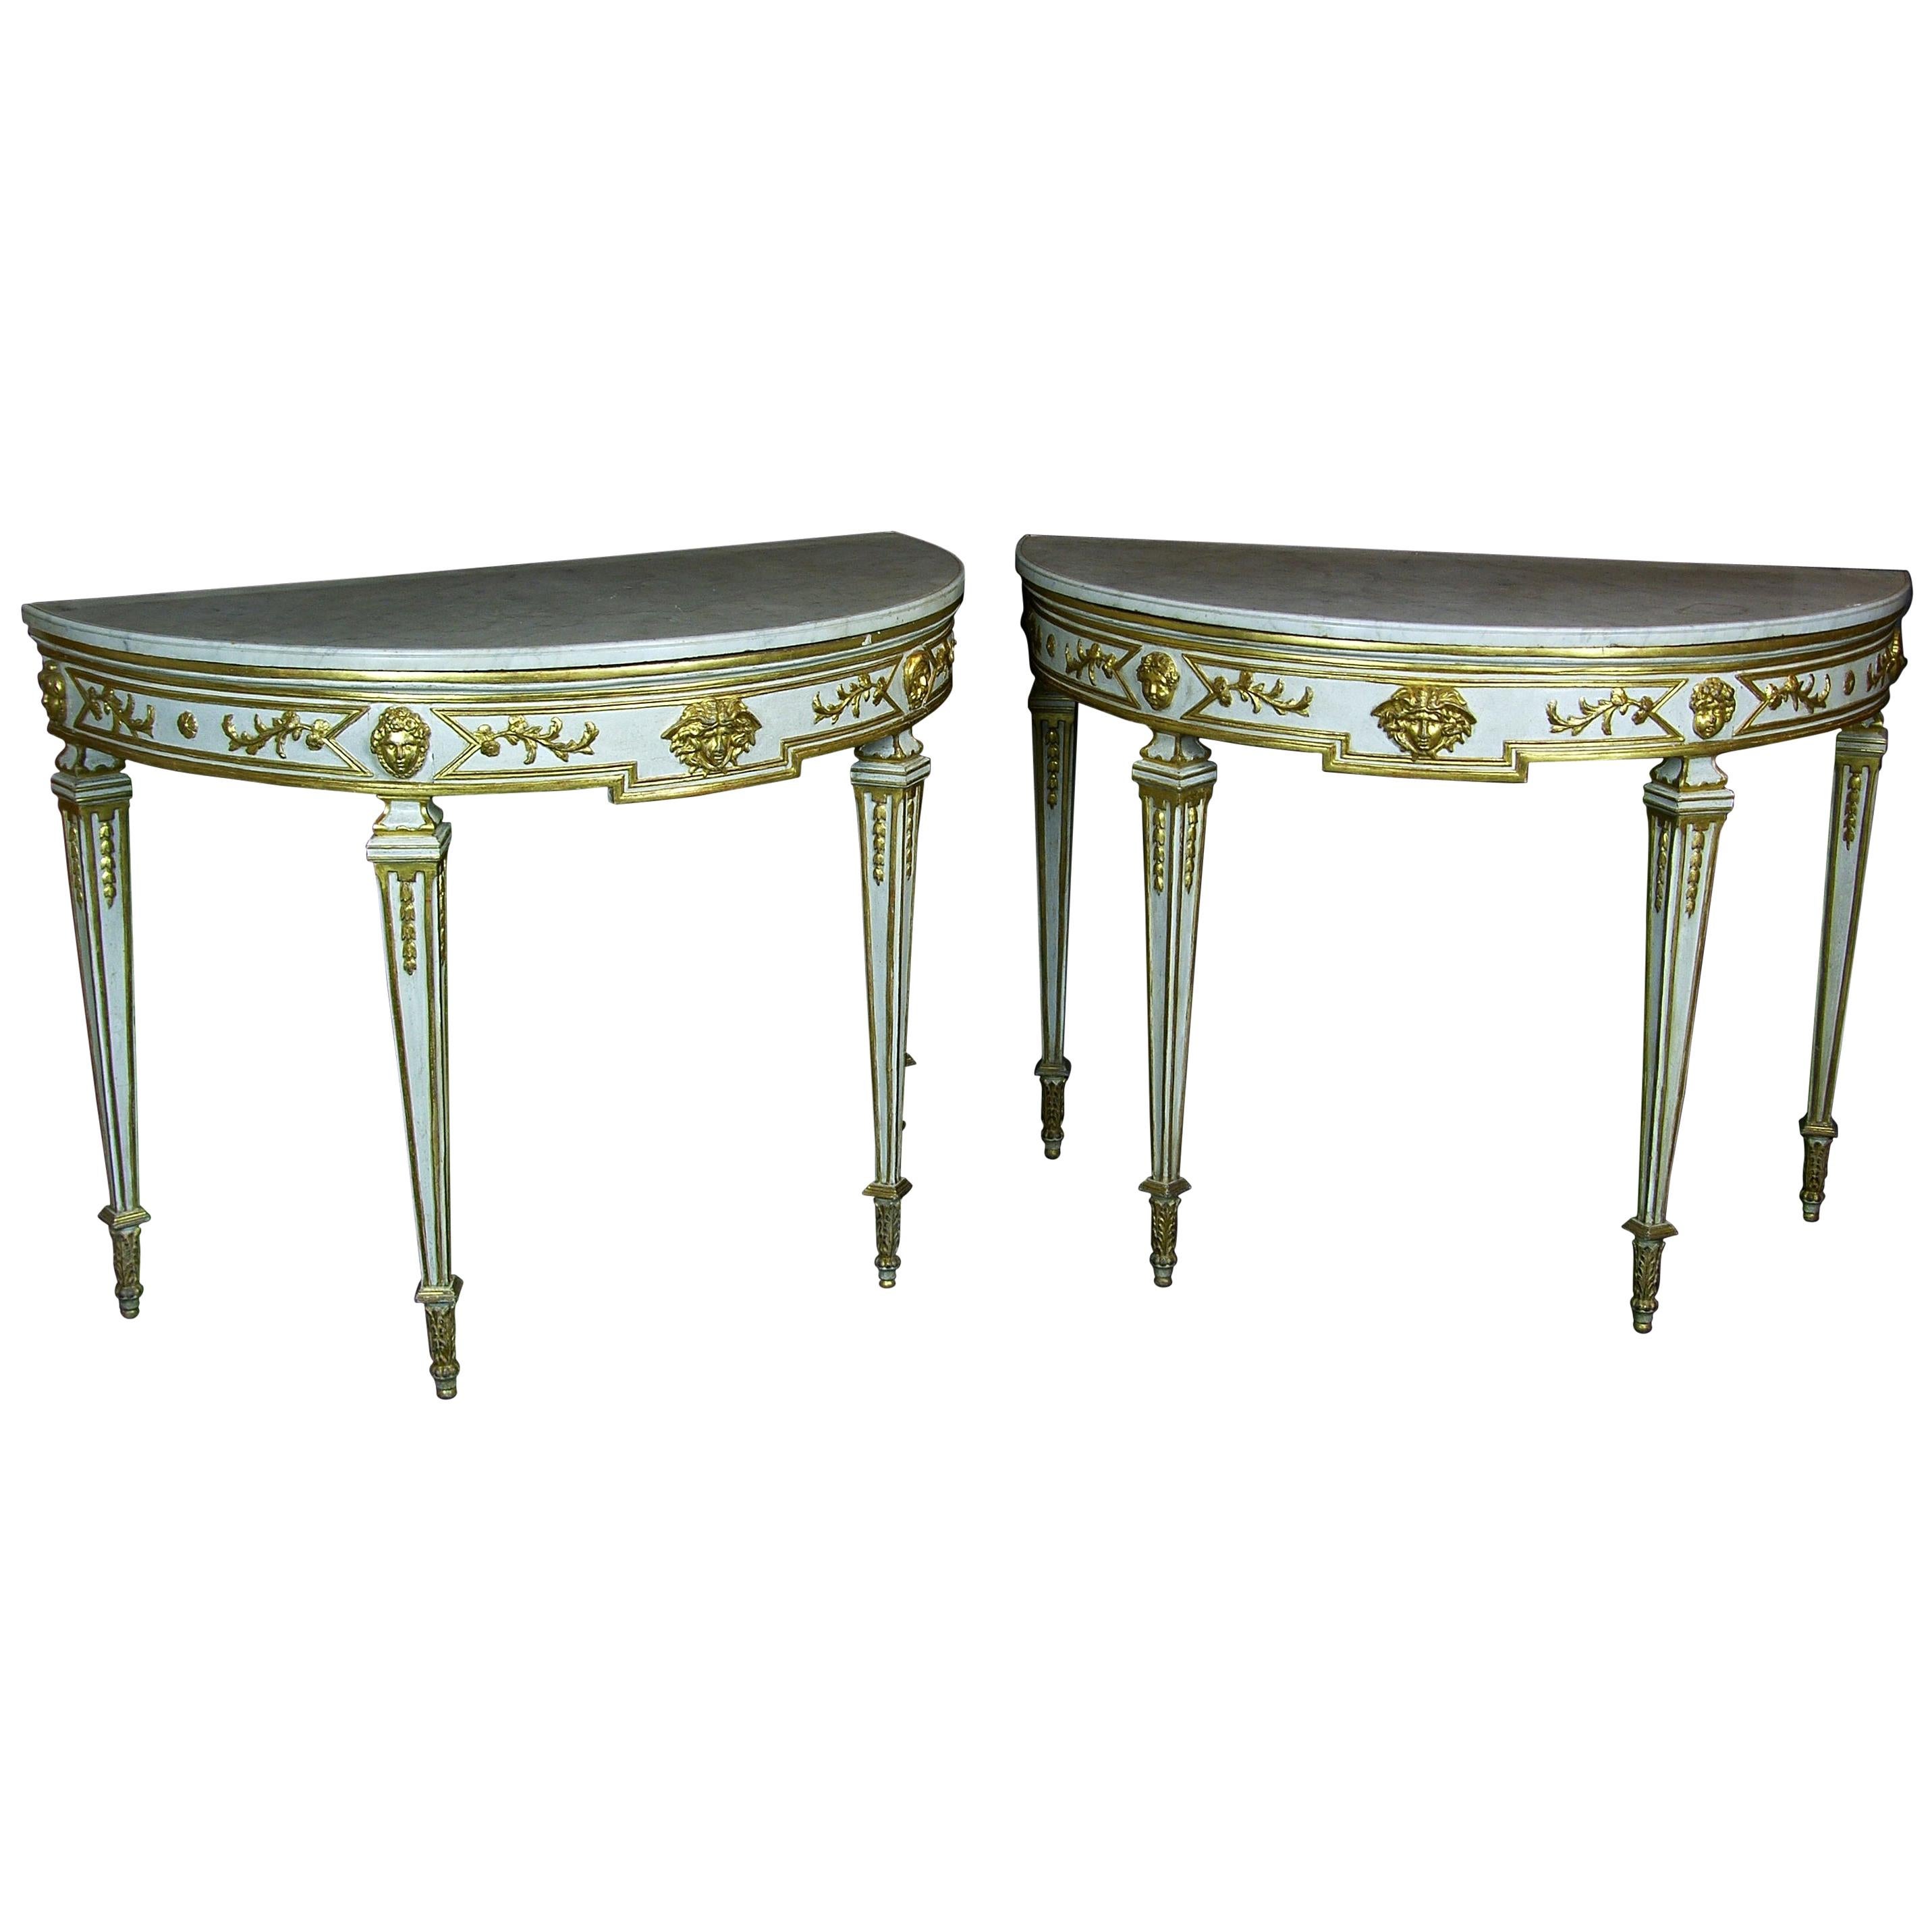 18th Century, Pair of Italian Half-Moon Lacquered Giltwood Neoclassical Console